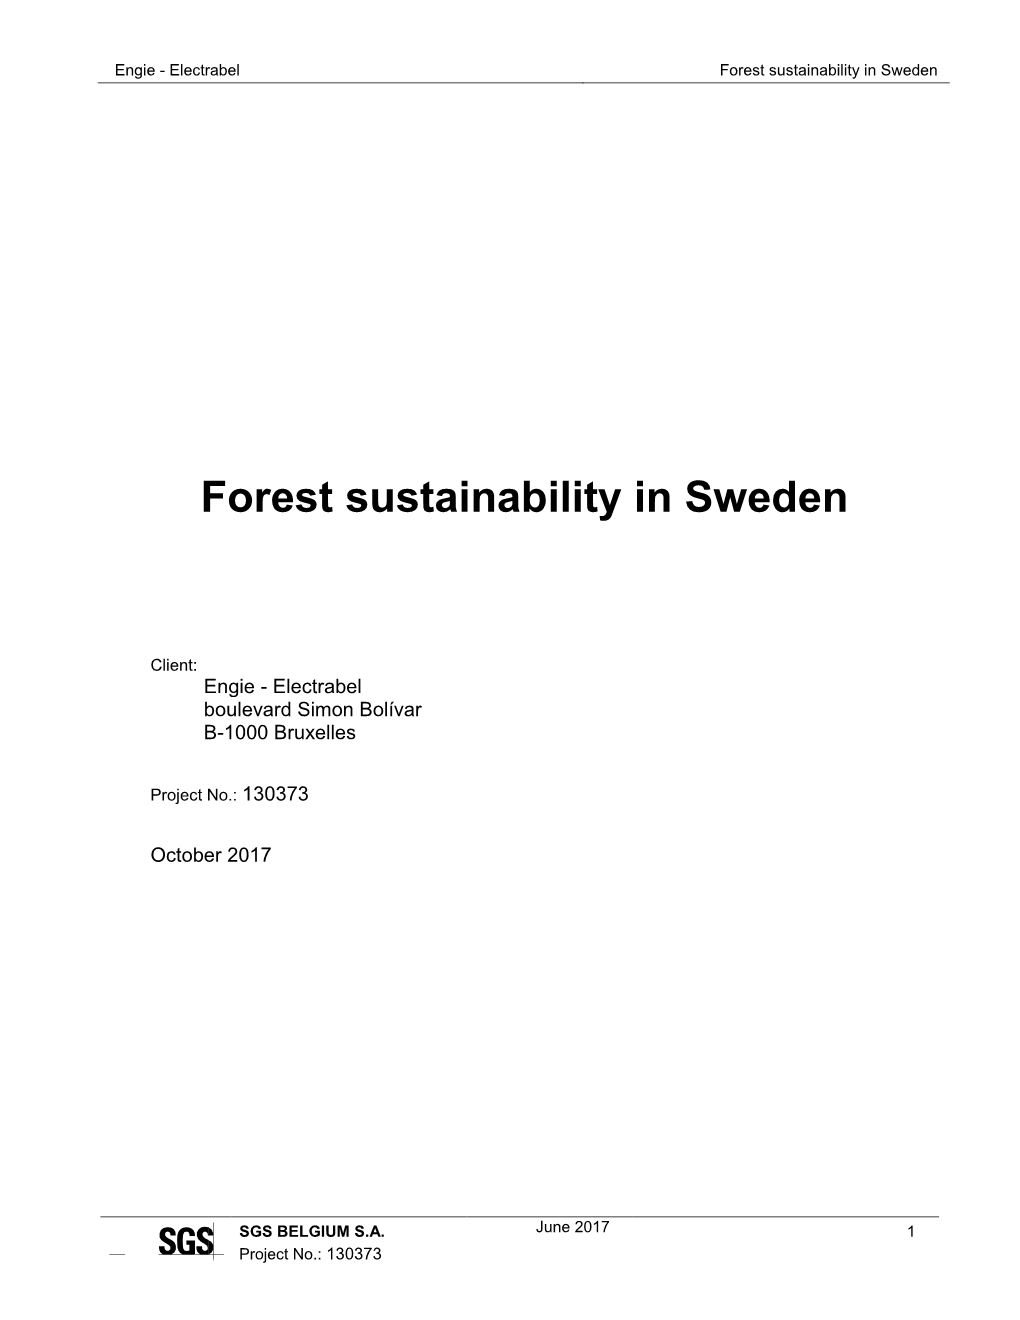 SGS Forest Sustainability in Sweden